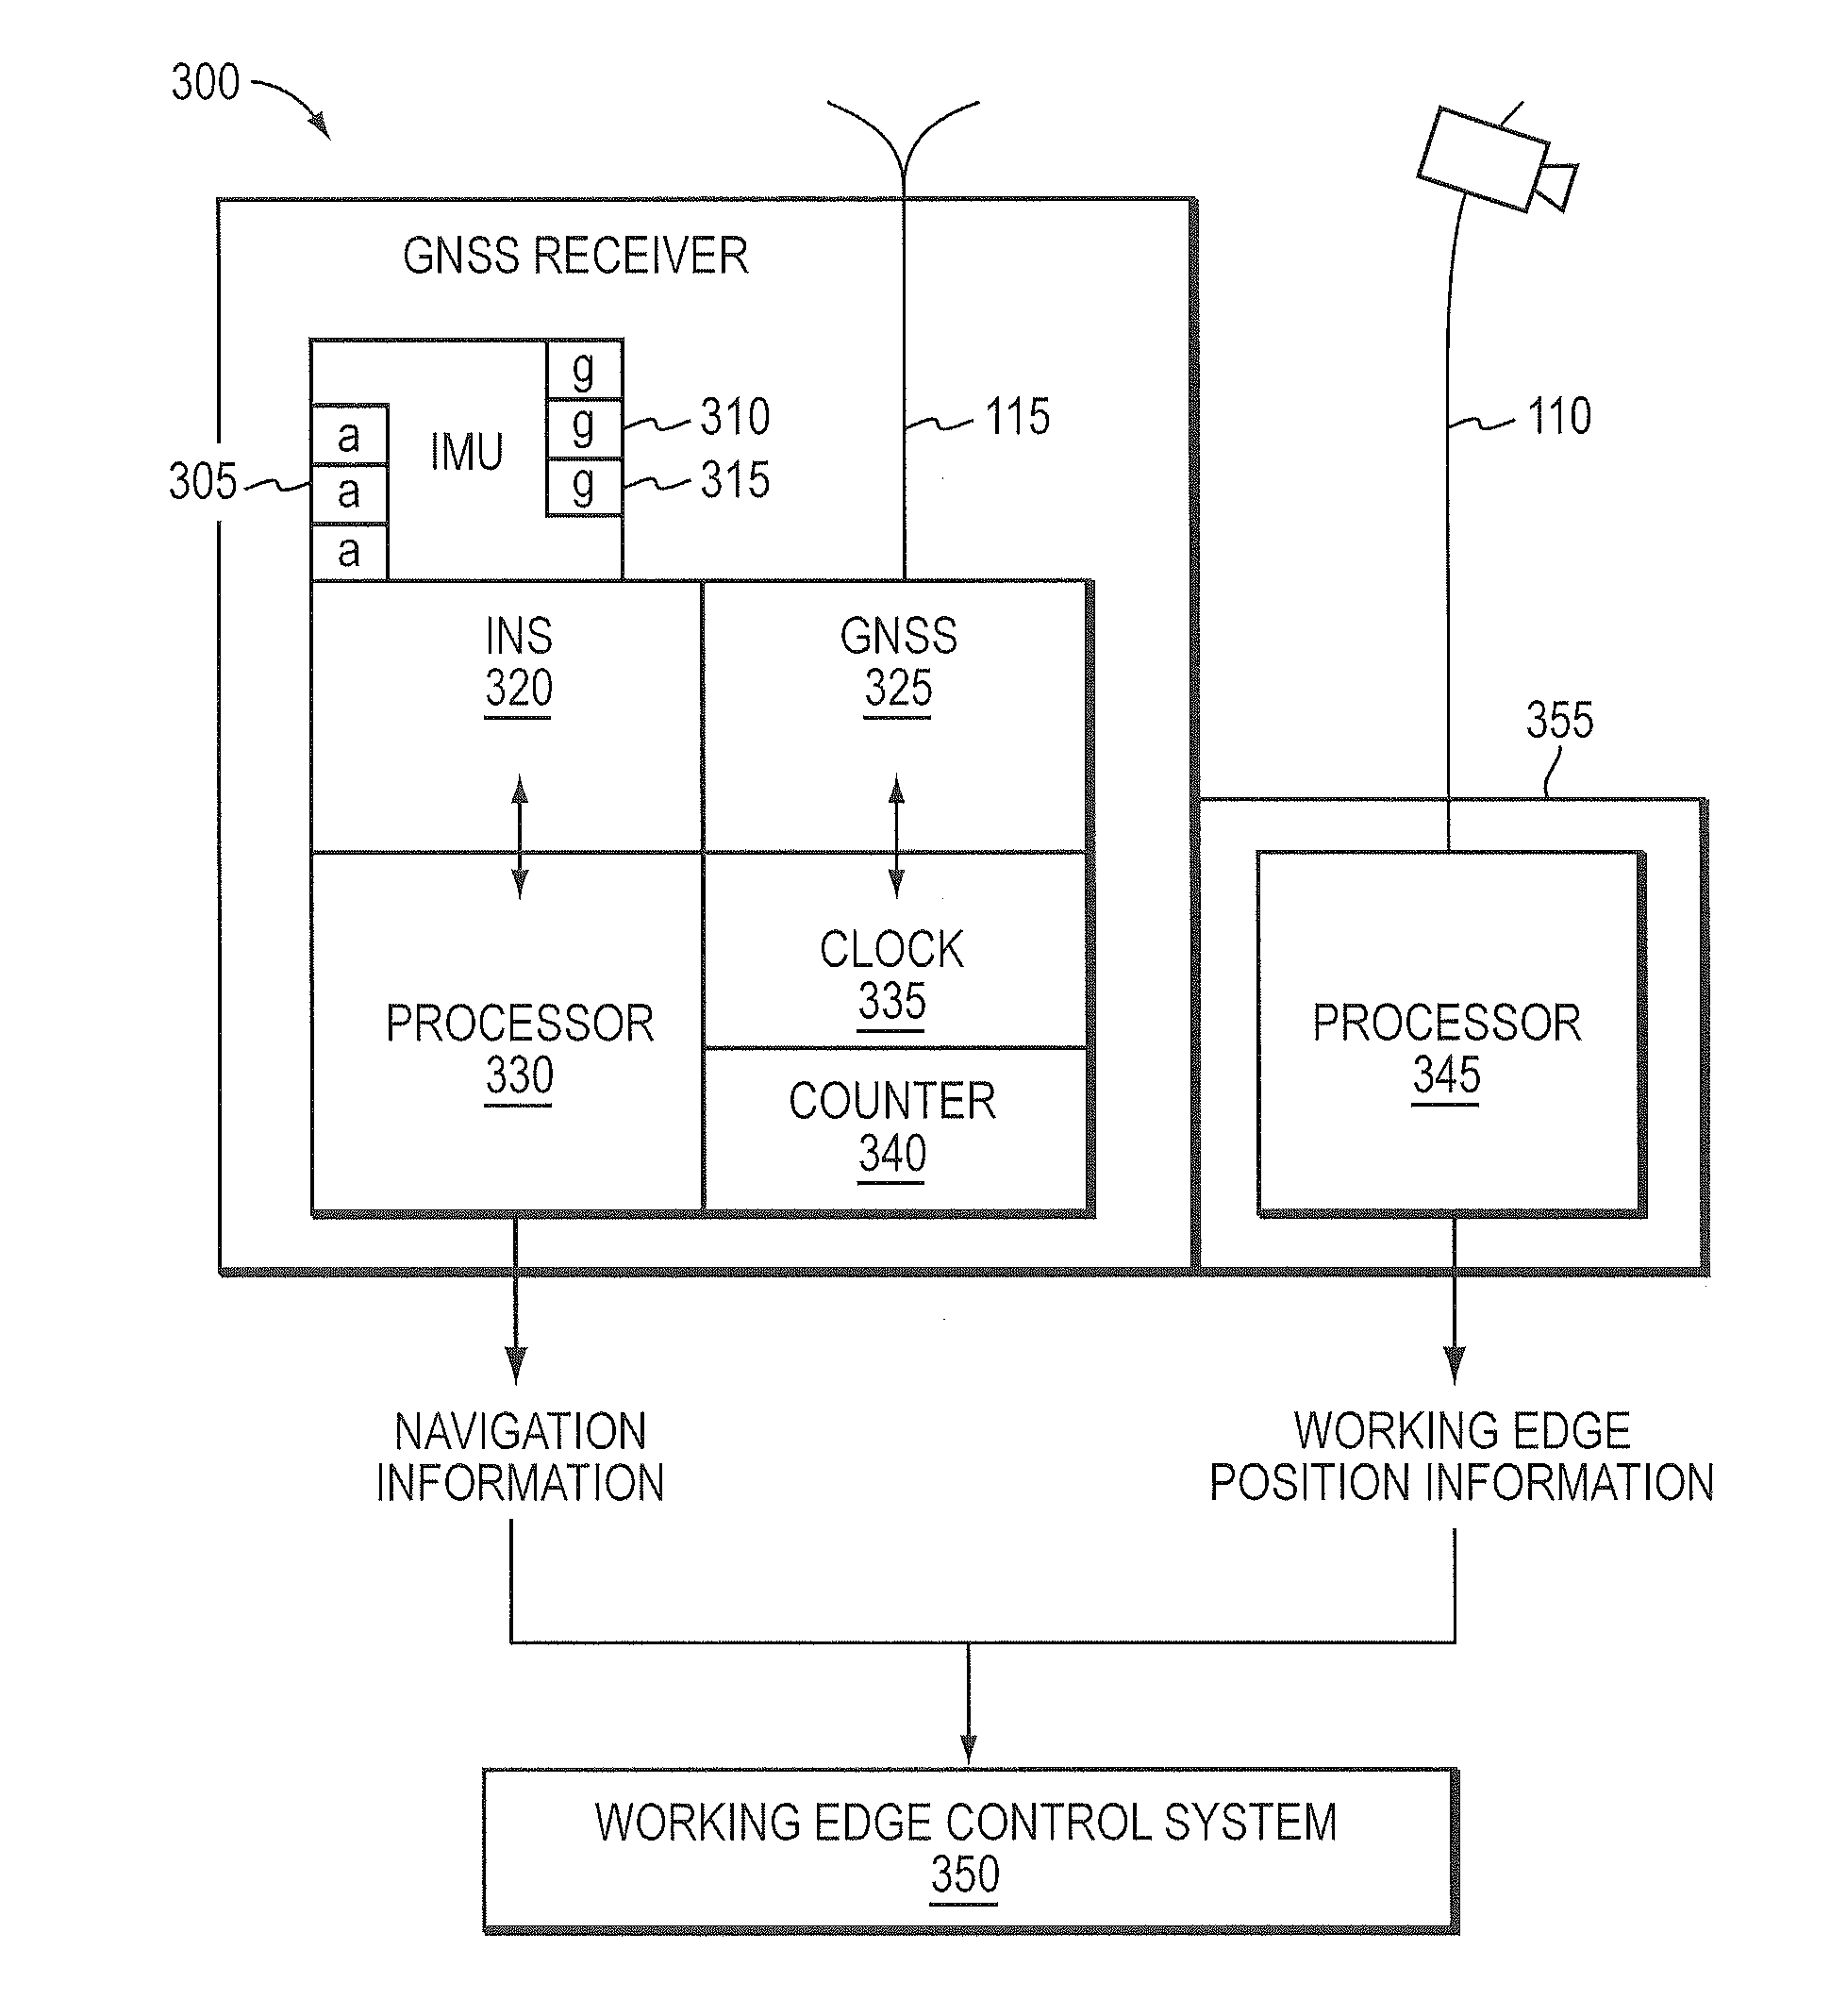 System and method for heavy equipment navigation and working edge positioning